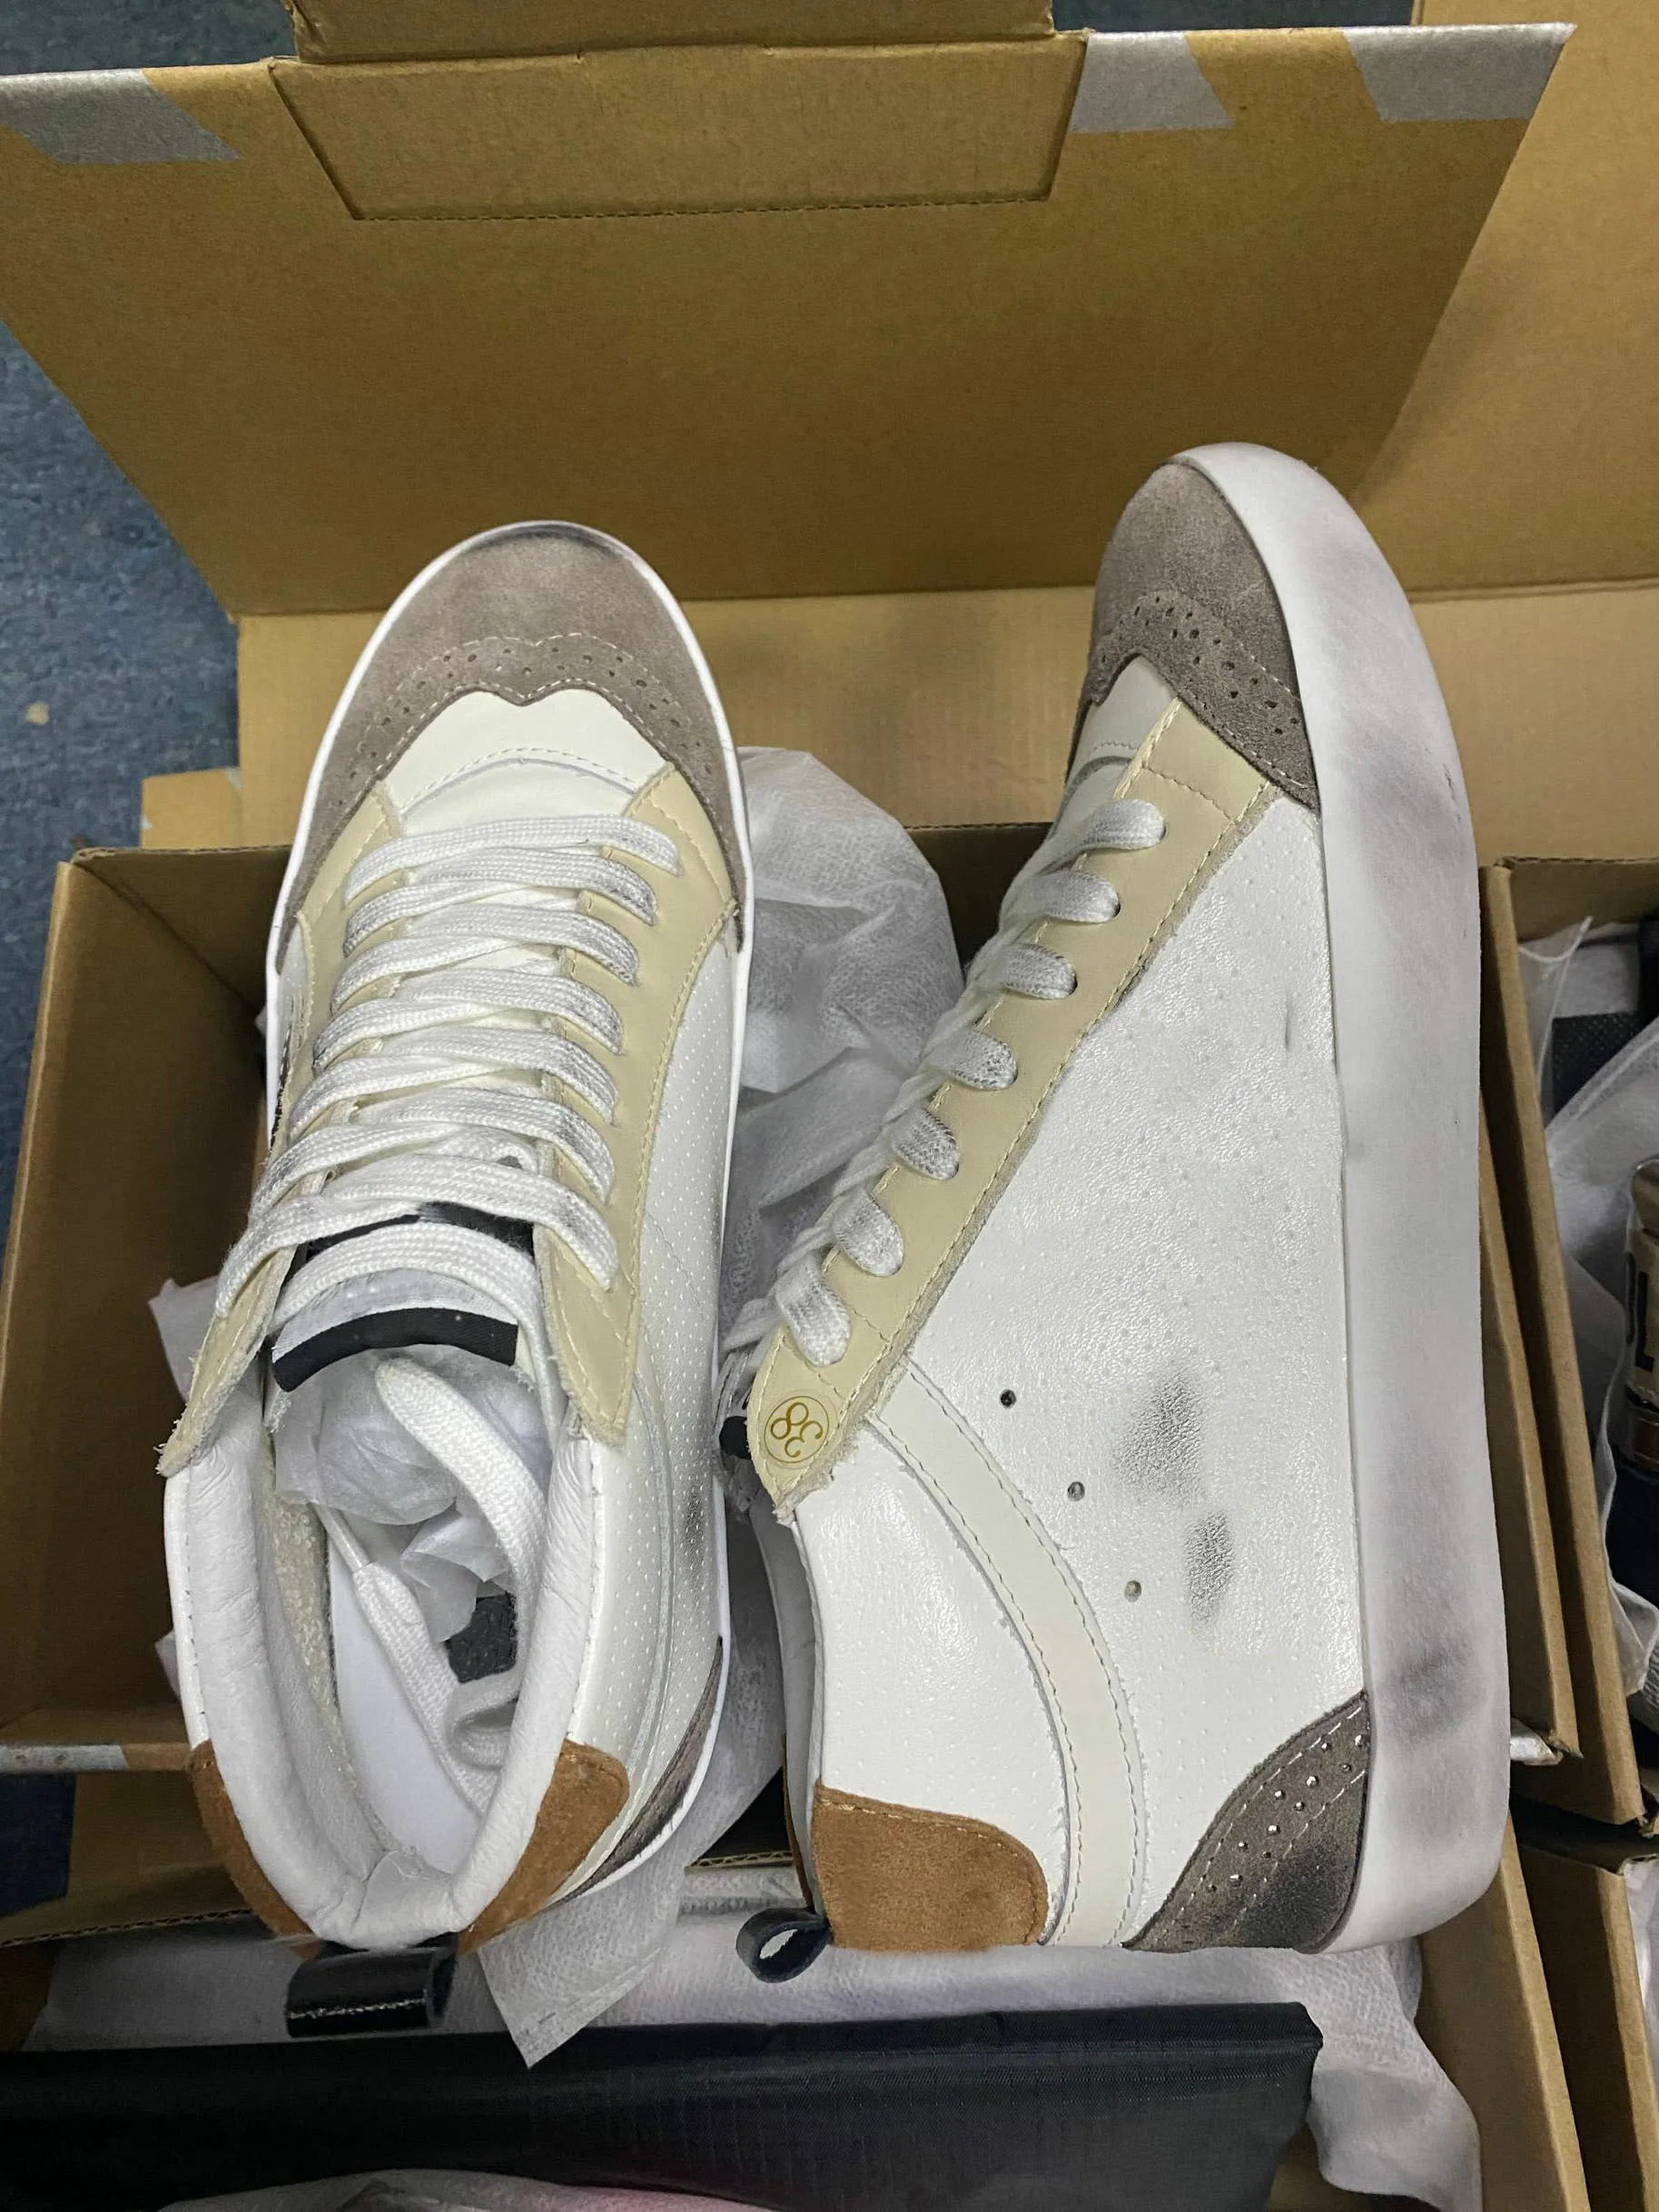 Golden Goode Sneakers Designer Chaussures Golden Mid Star Casual Shoe Choot Lace-Up Sneakers Italy Metallic Disted High Top Suede Calf Leather Snaker Goose's Women 570